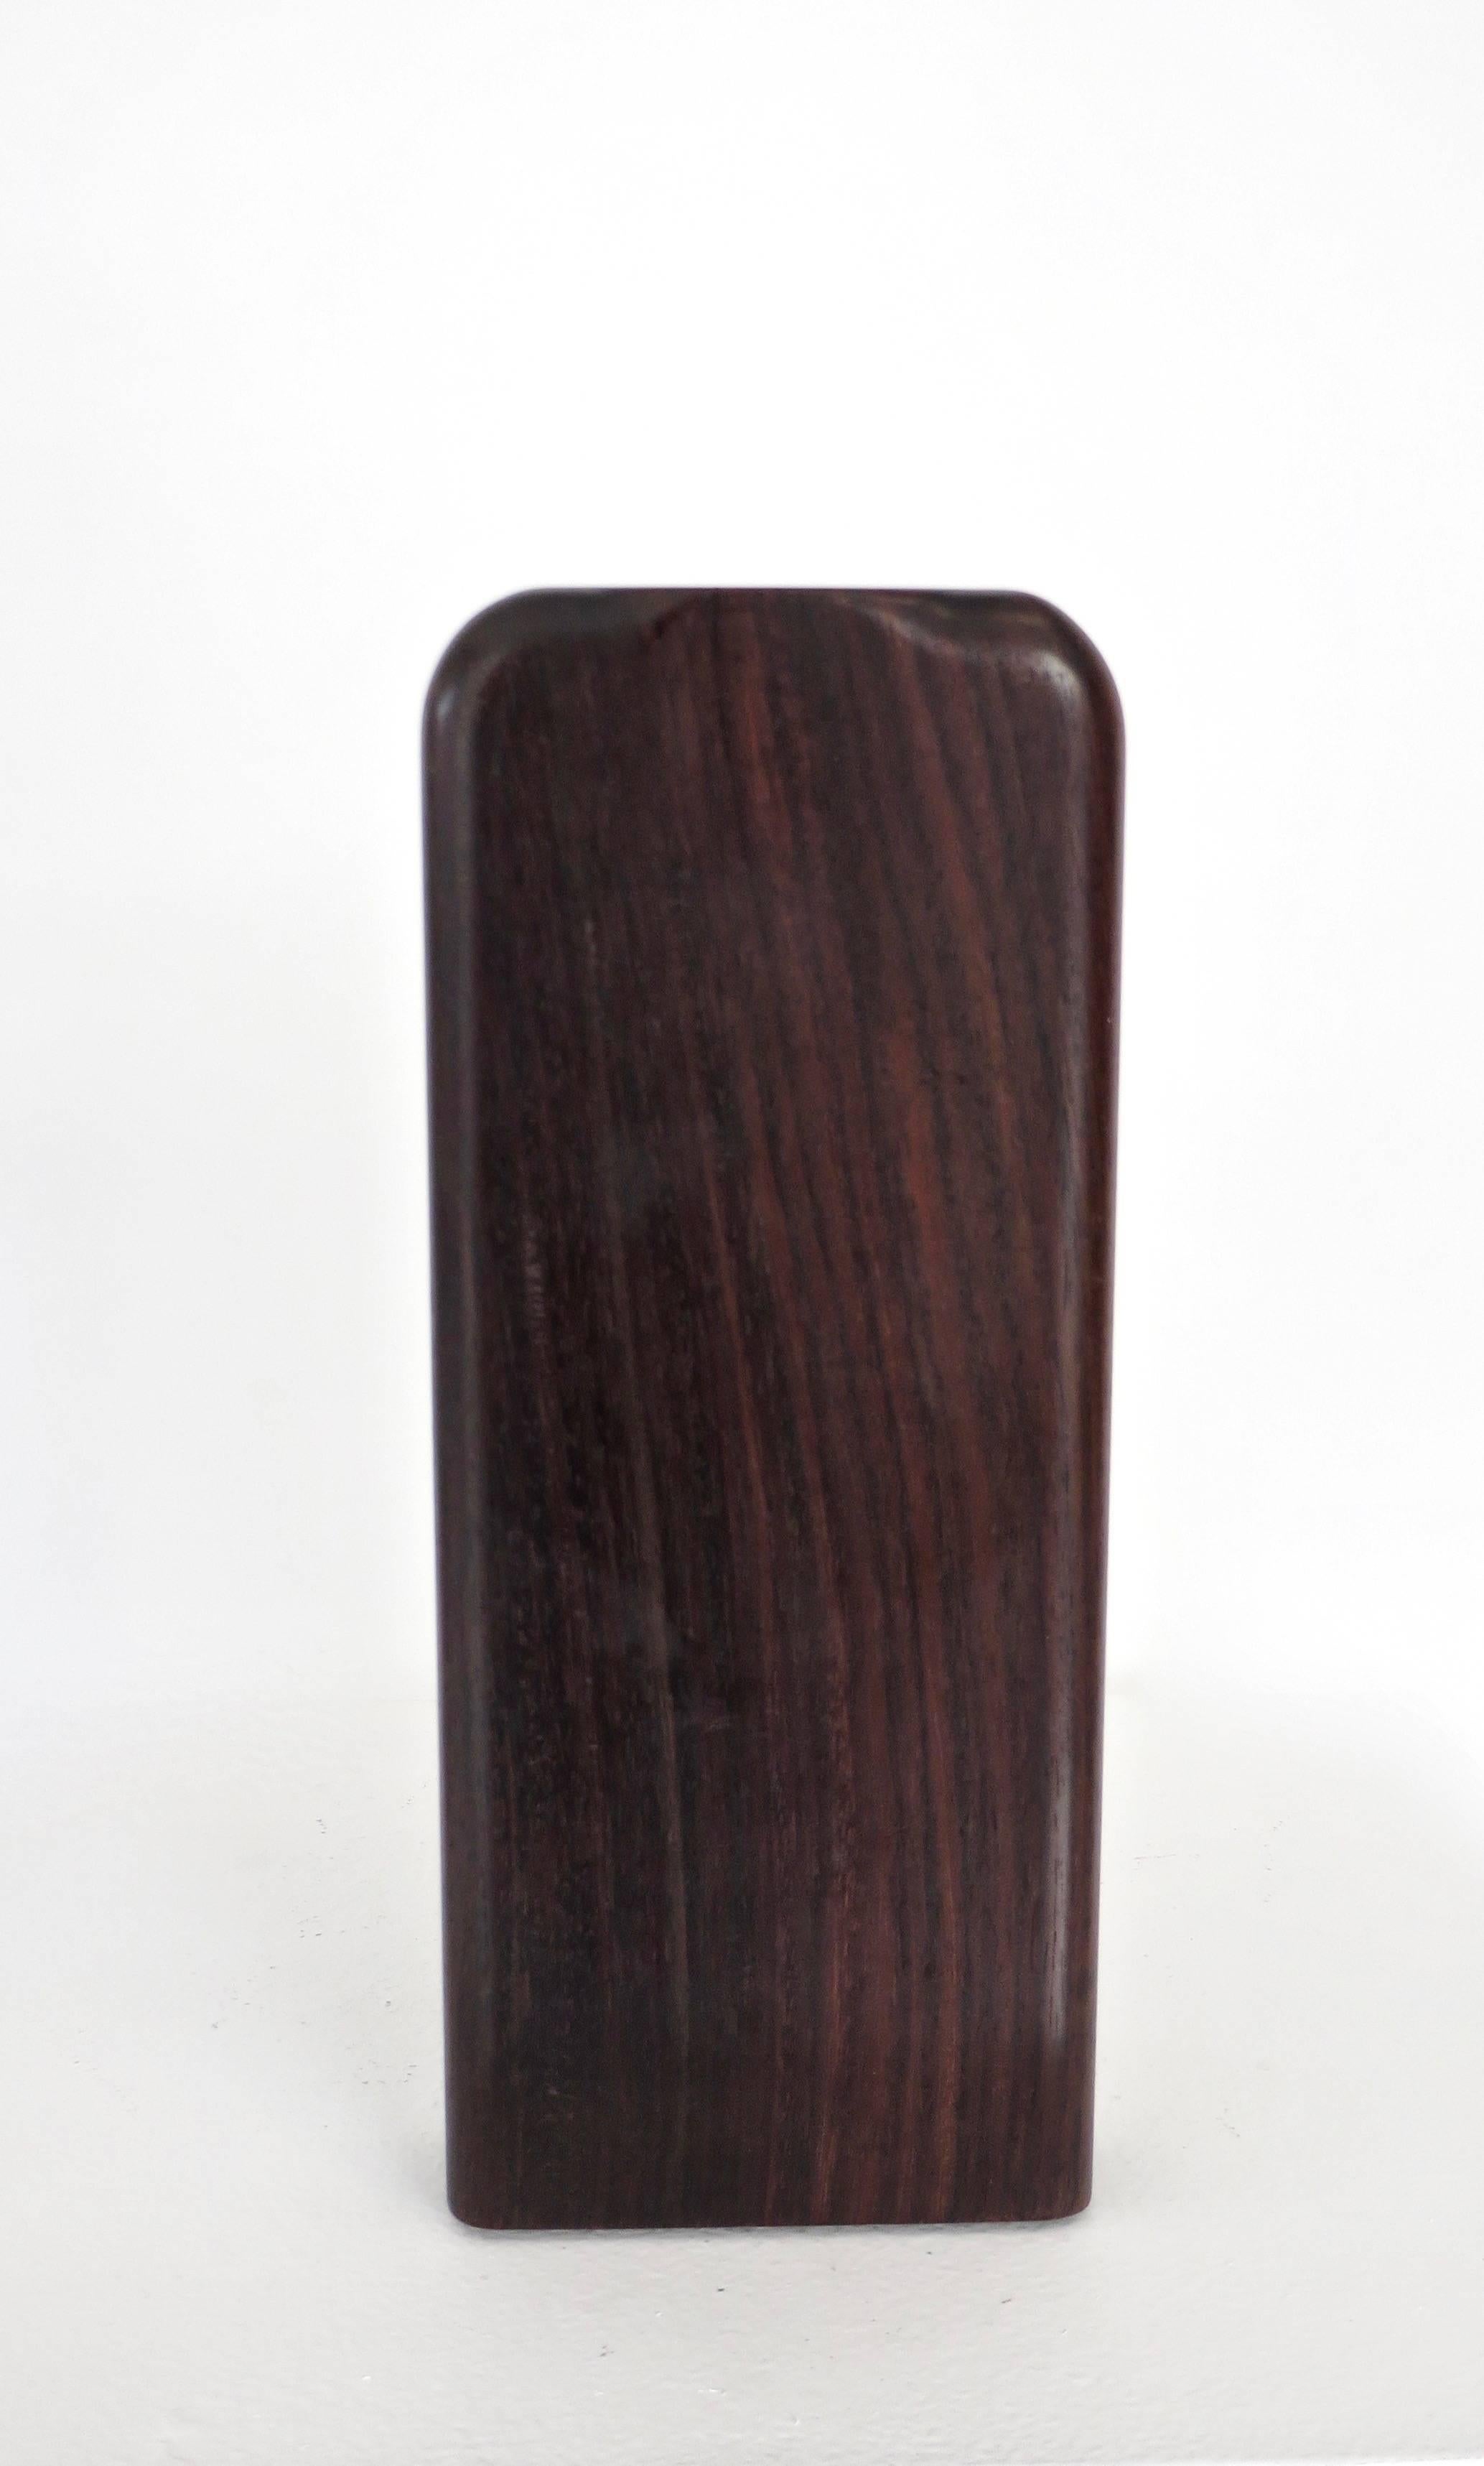 A solid rosewood Minimalist style flower vase with a copper tube liner. 
A beautiful piece of wood with no attribution. 
Artisanal quality obvious from the copper tube liner that fits perfectly. 
Unsigned.